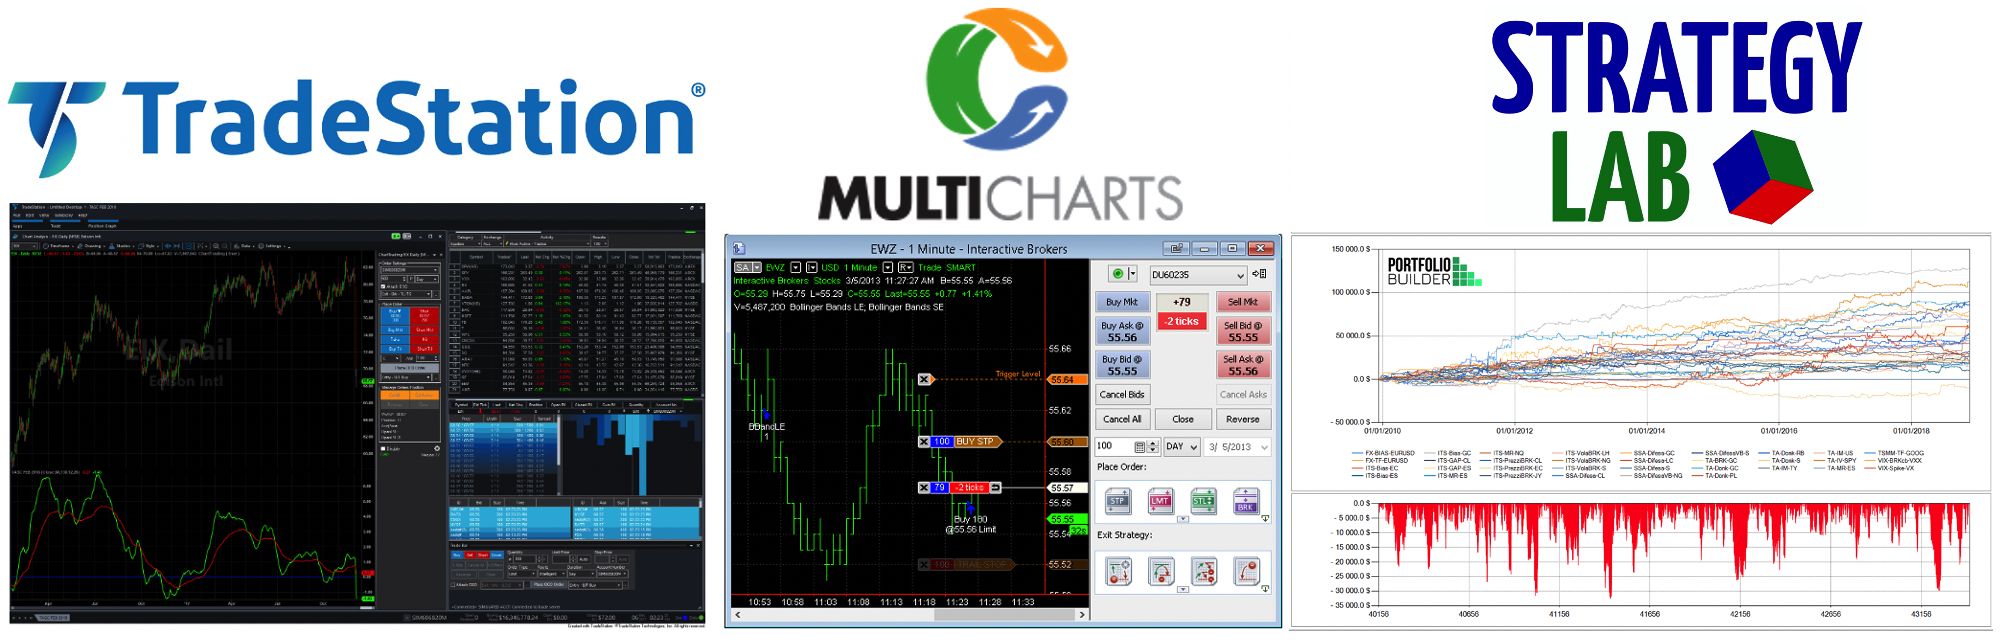 software gestione portafoglio trading, strategie di portafoglio, selezione strategie trading, money management, equity control trading